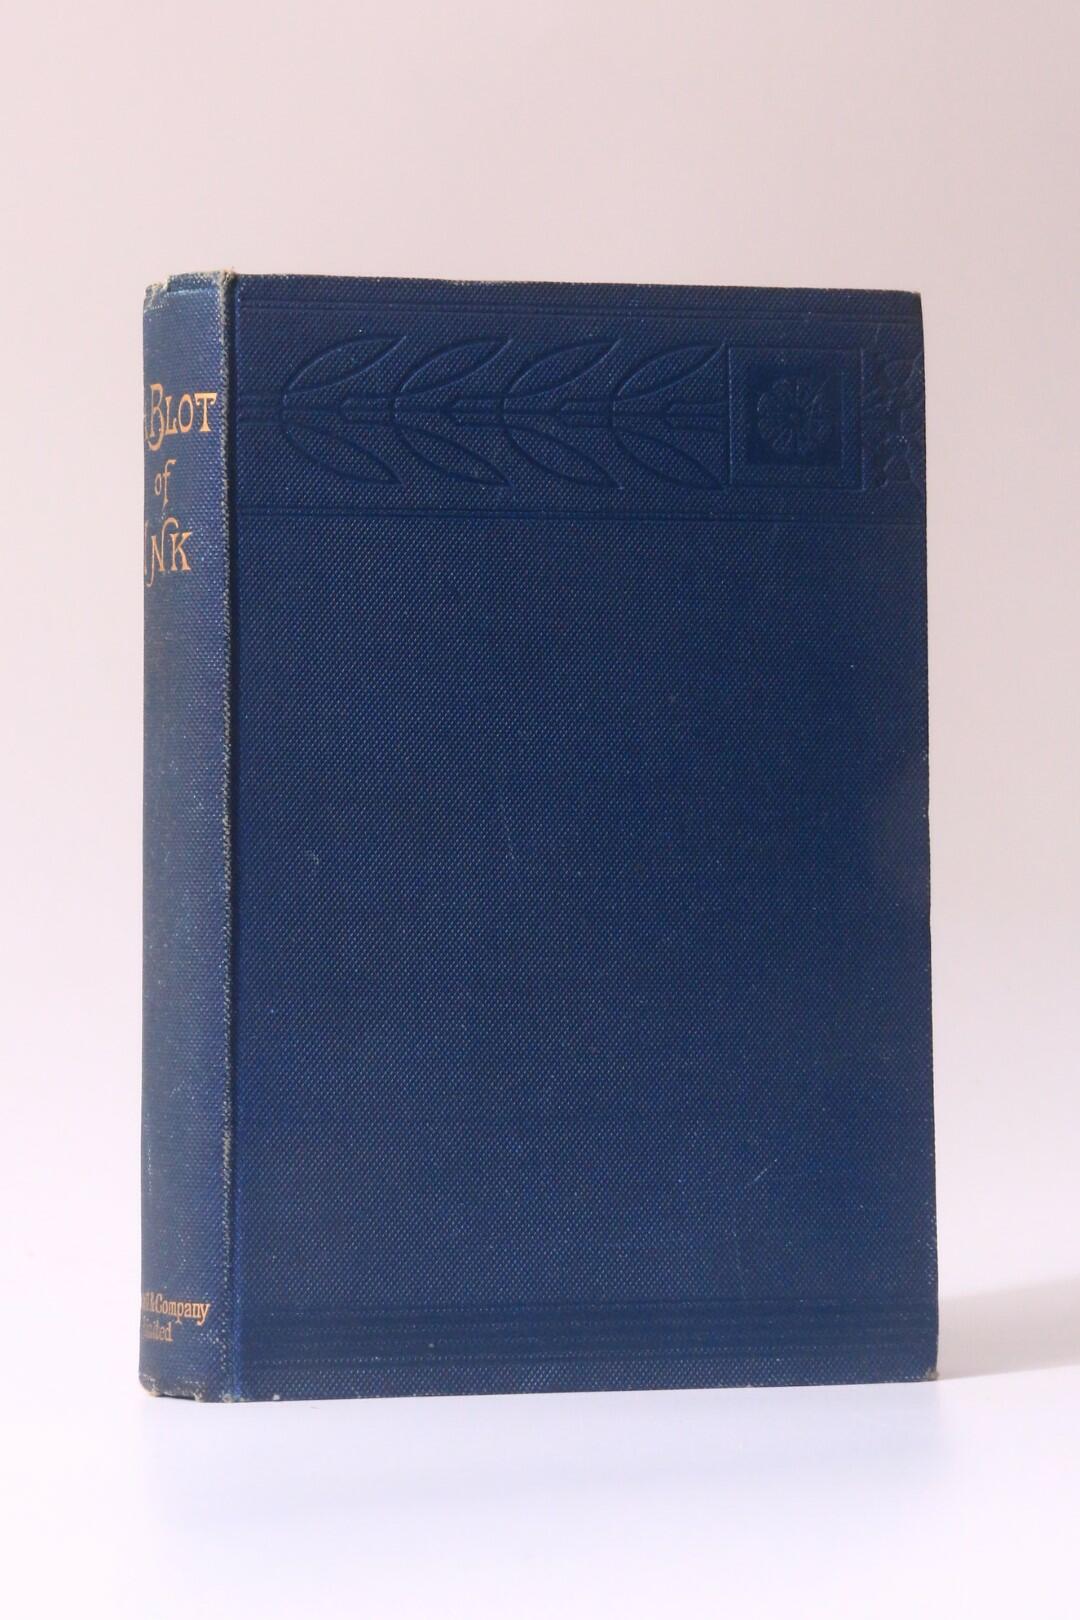 Paul M. Francke - A Blot of Ink - Cassell, 1892, First Edition.